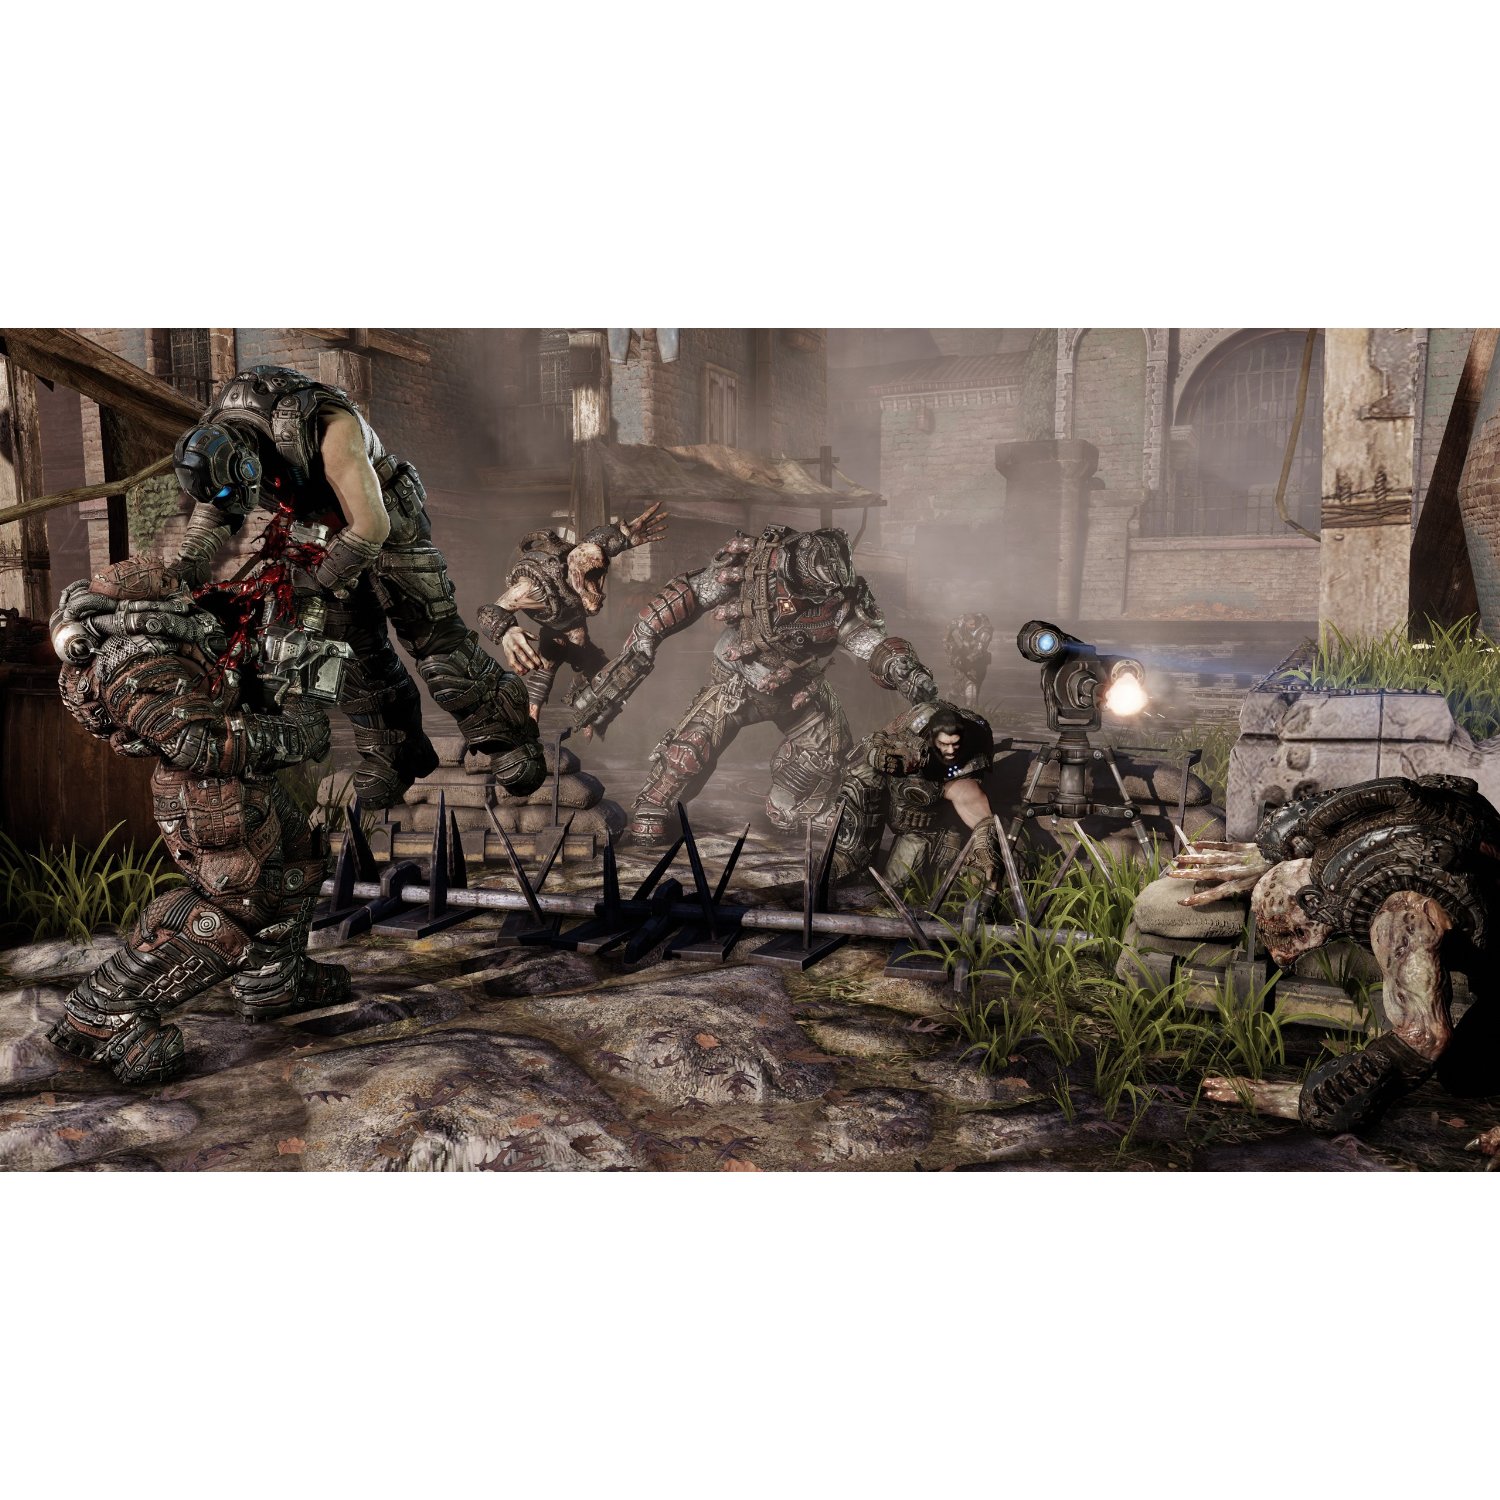 http://thetechjournal.com/wp-content/uploads/images/1108/1312638793-gears-of-war-3-game-for-xbox-360-6.jpg